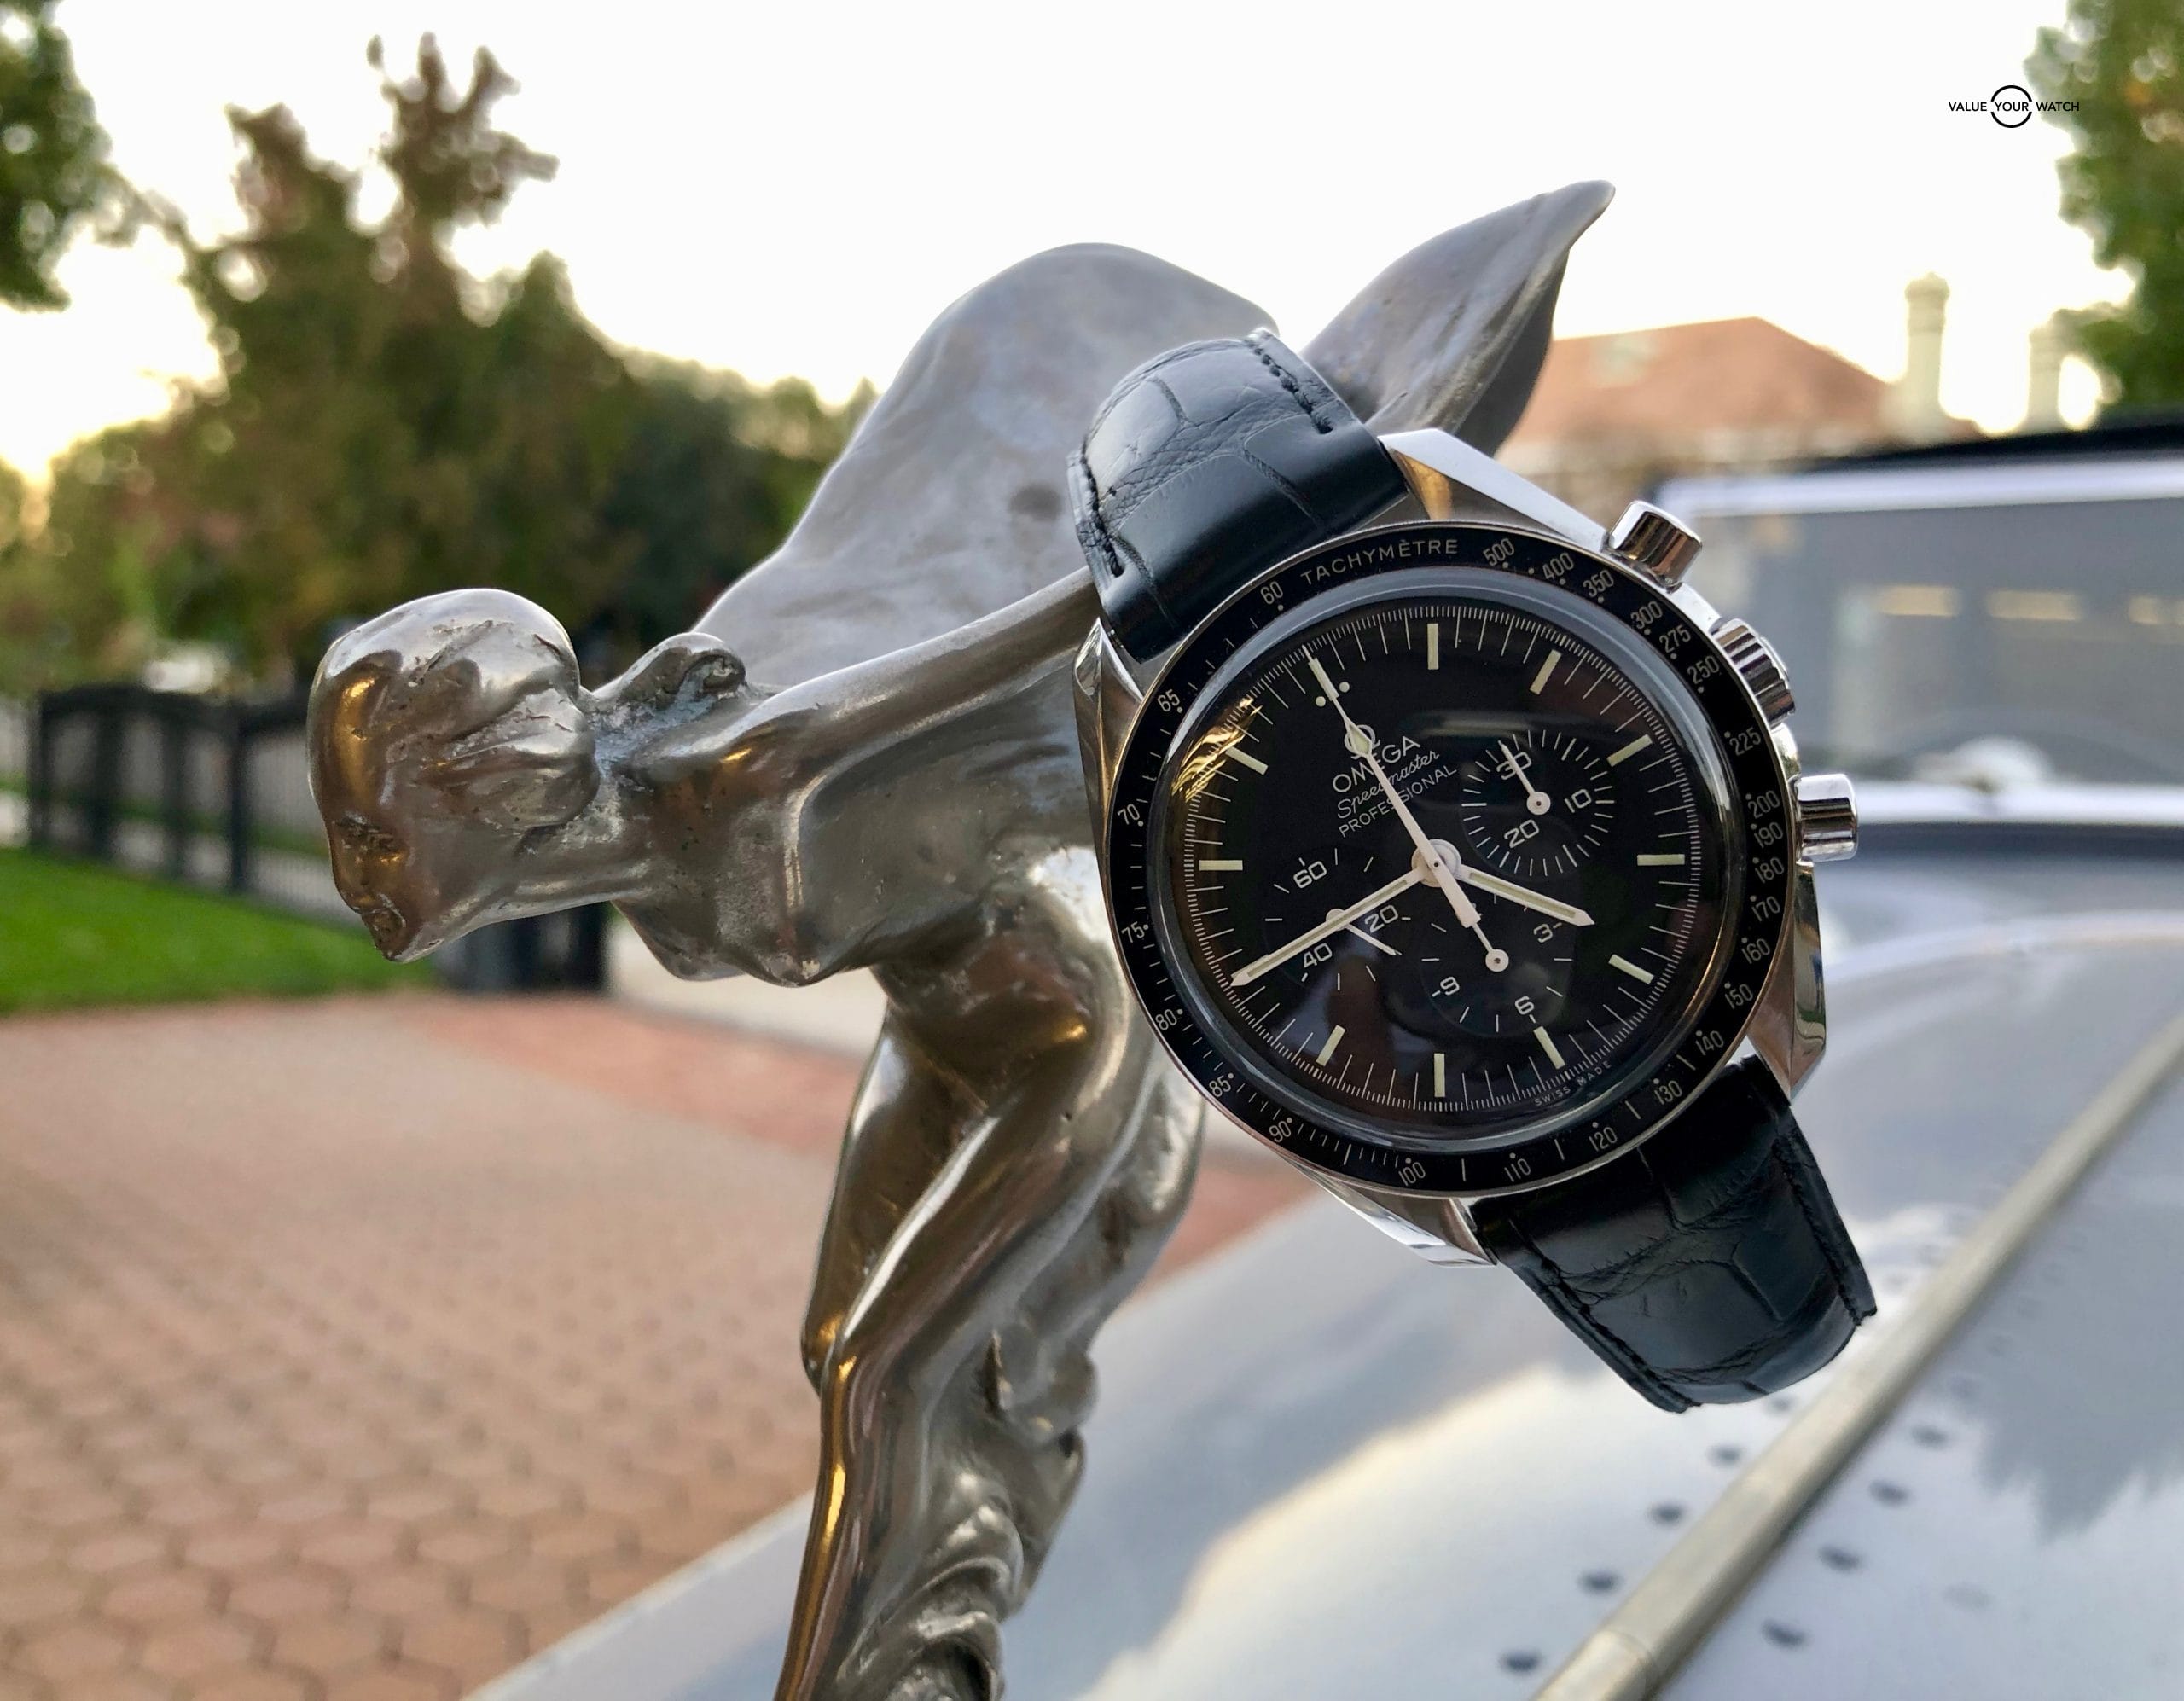 Omega, Porsche join hands for limited edition Speedmaster watch